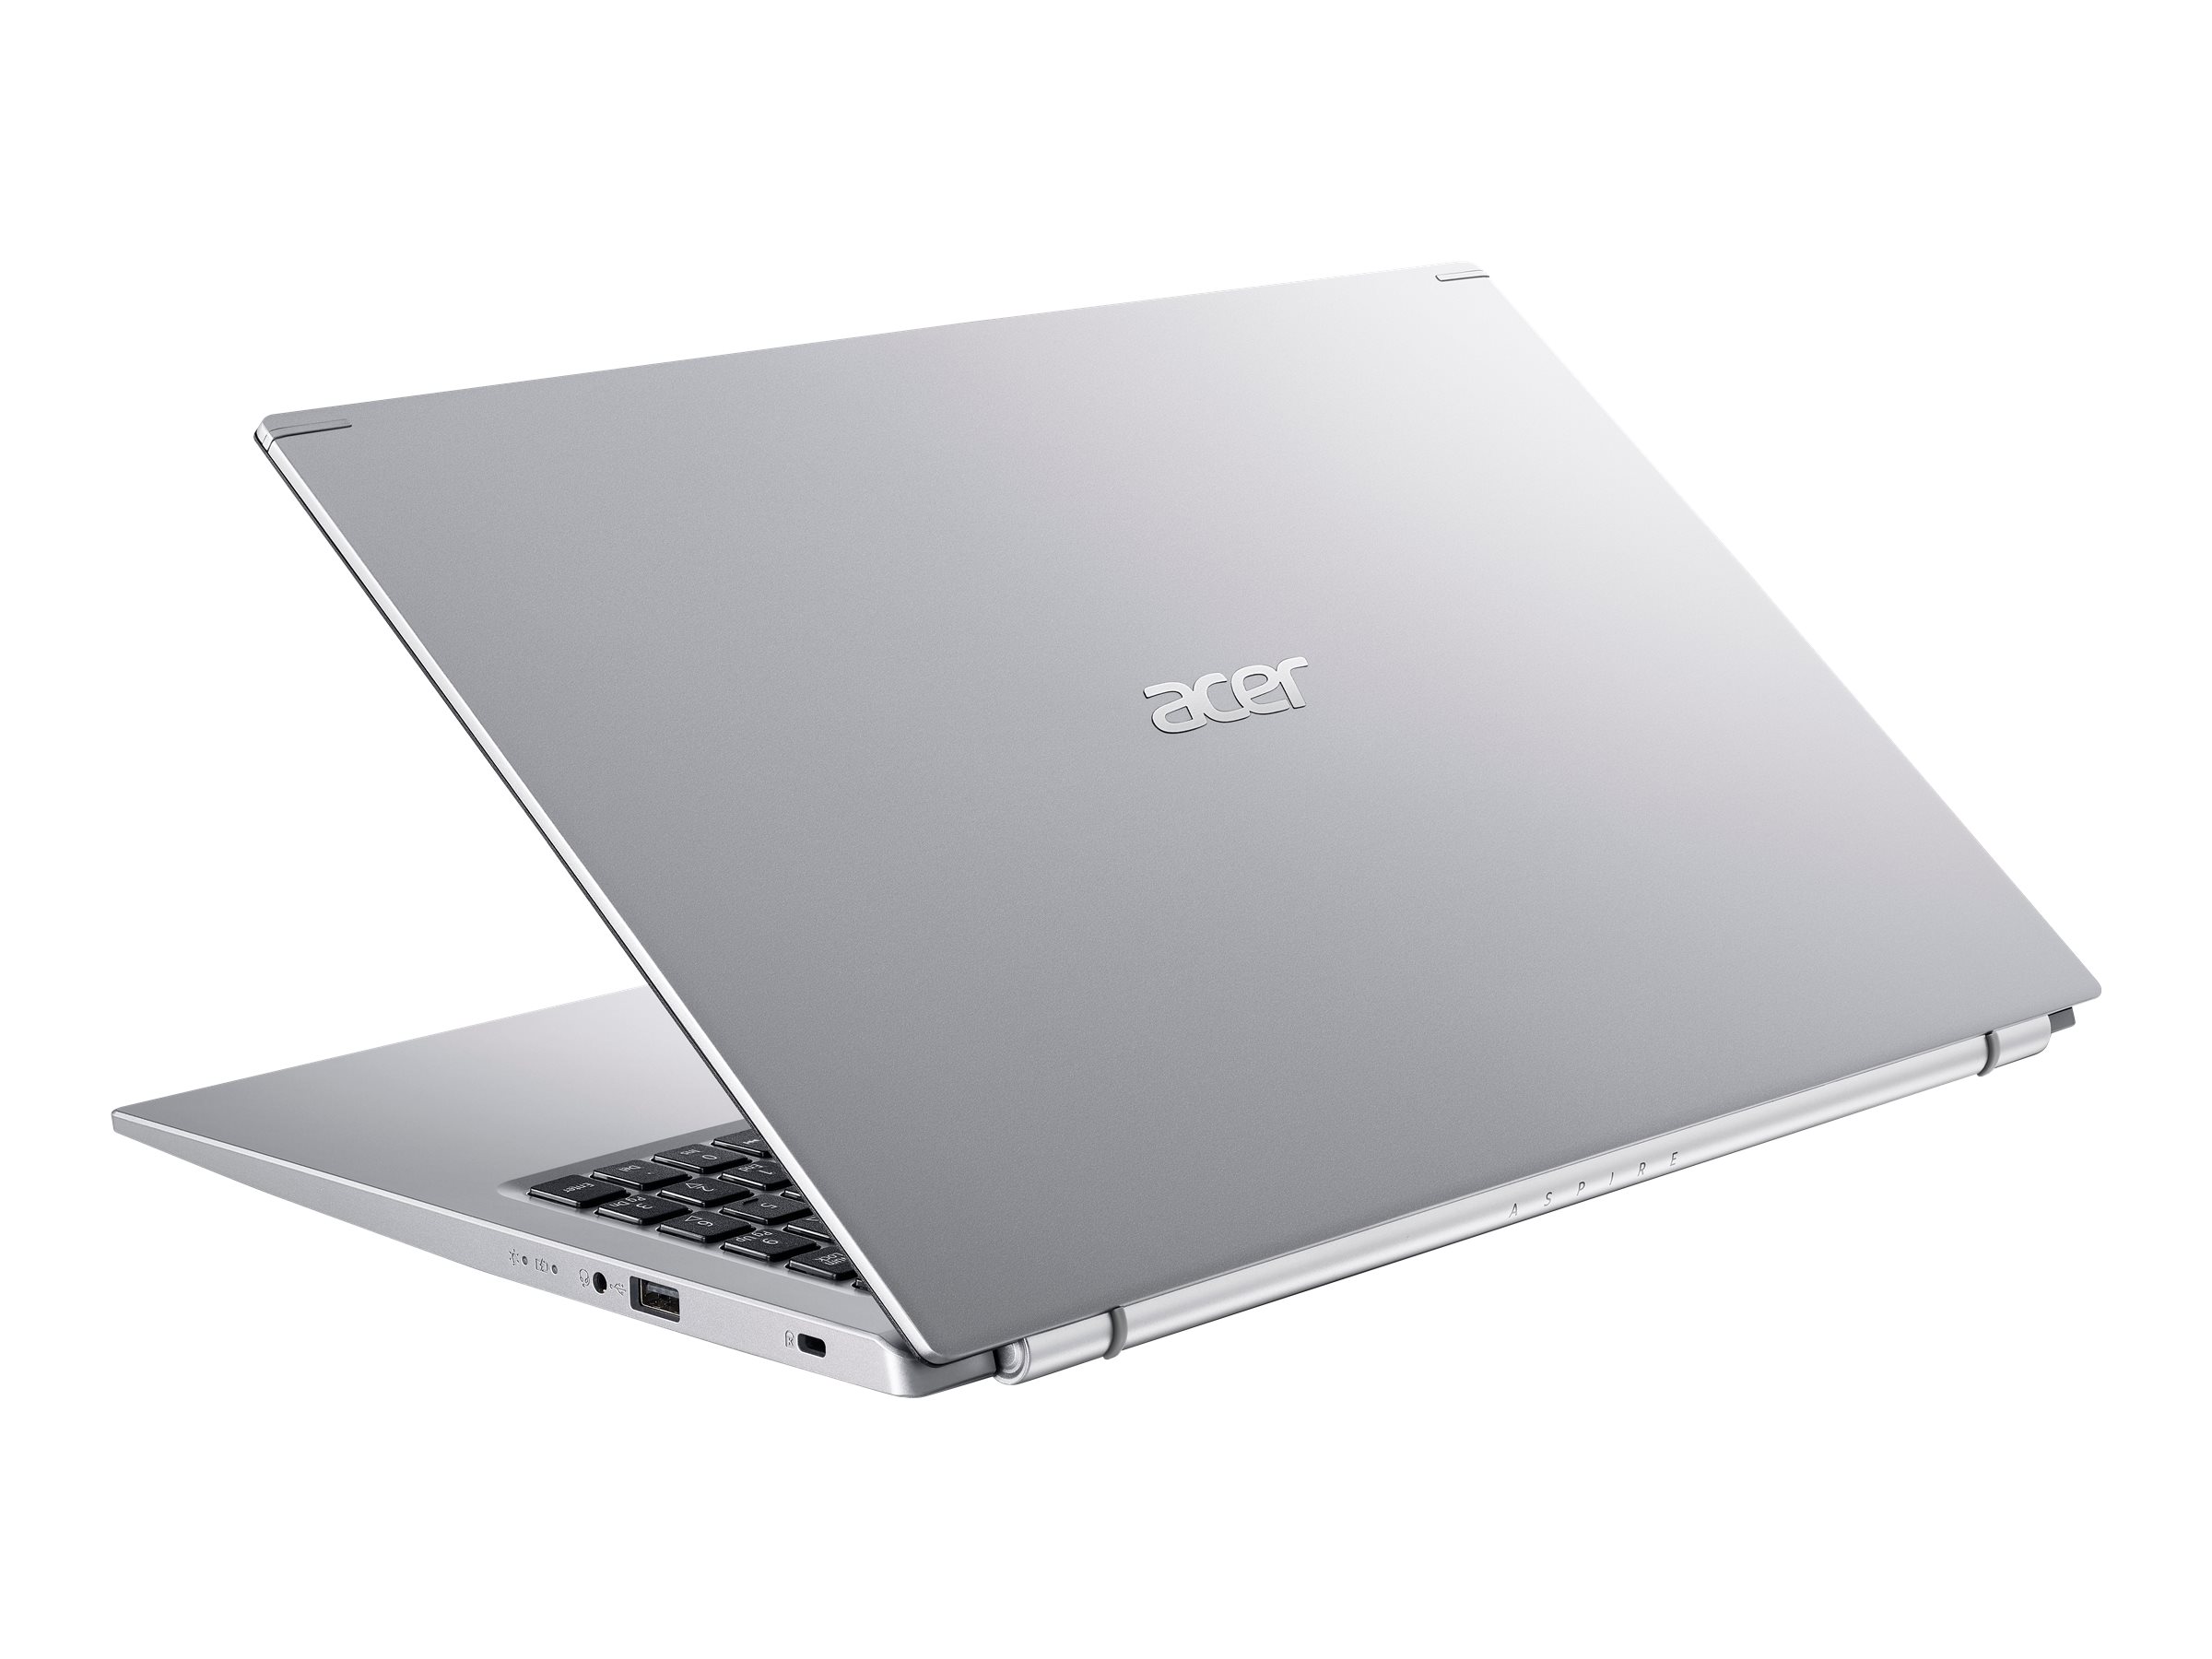 Acer Aspire 5 Slim Laptop, 15.6 inch Full HD IPS Display, Intel Core i3-1115G4(Beat i5-1035G4, Up to 4.1GHz) Processor, 20GB DDR4, 512GB PCIe SSD, WiFi 6, USB, Webcam, Windows 11 Home in S, Cefesfy - image 4 of 8